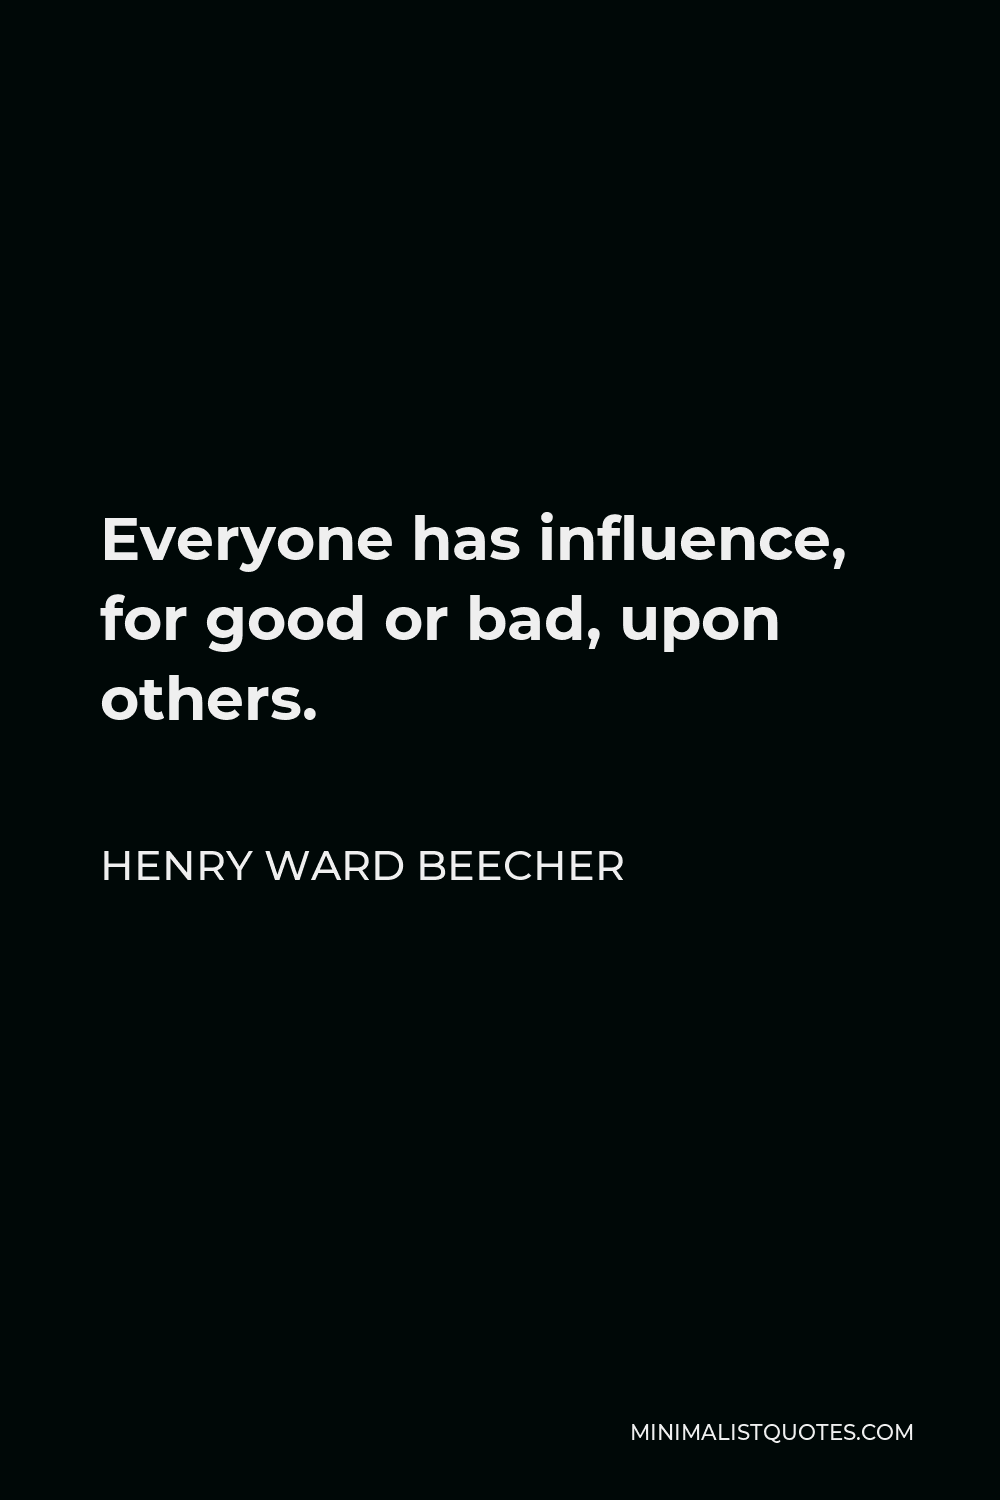 Henry Ward Beecher Quote - Everyone has influence, for good or bad, upon others.